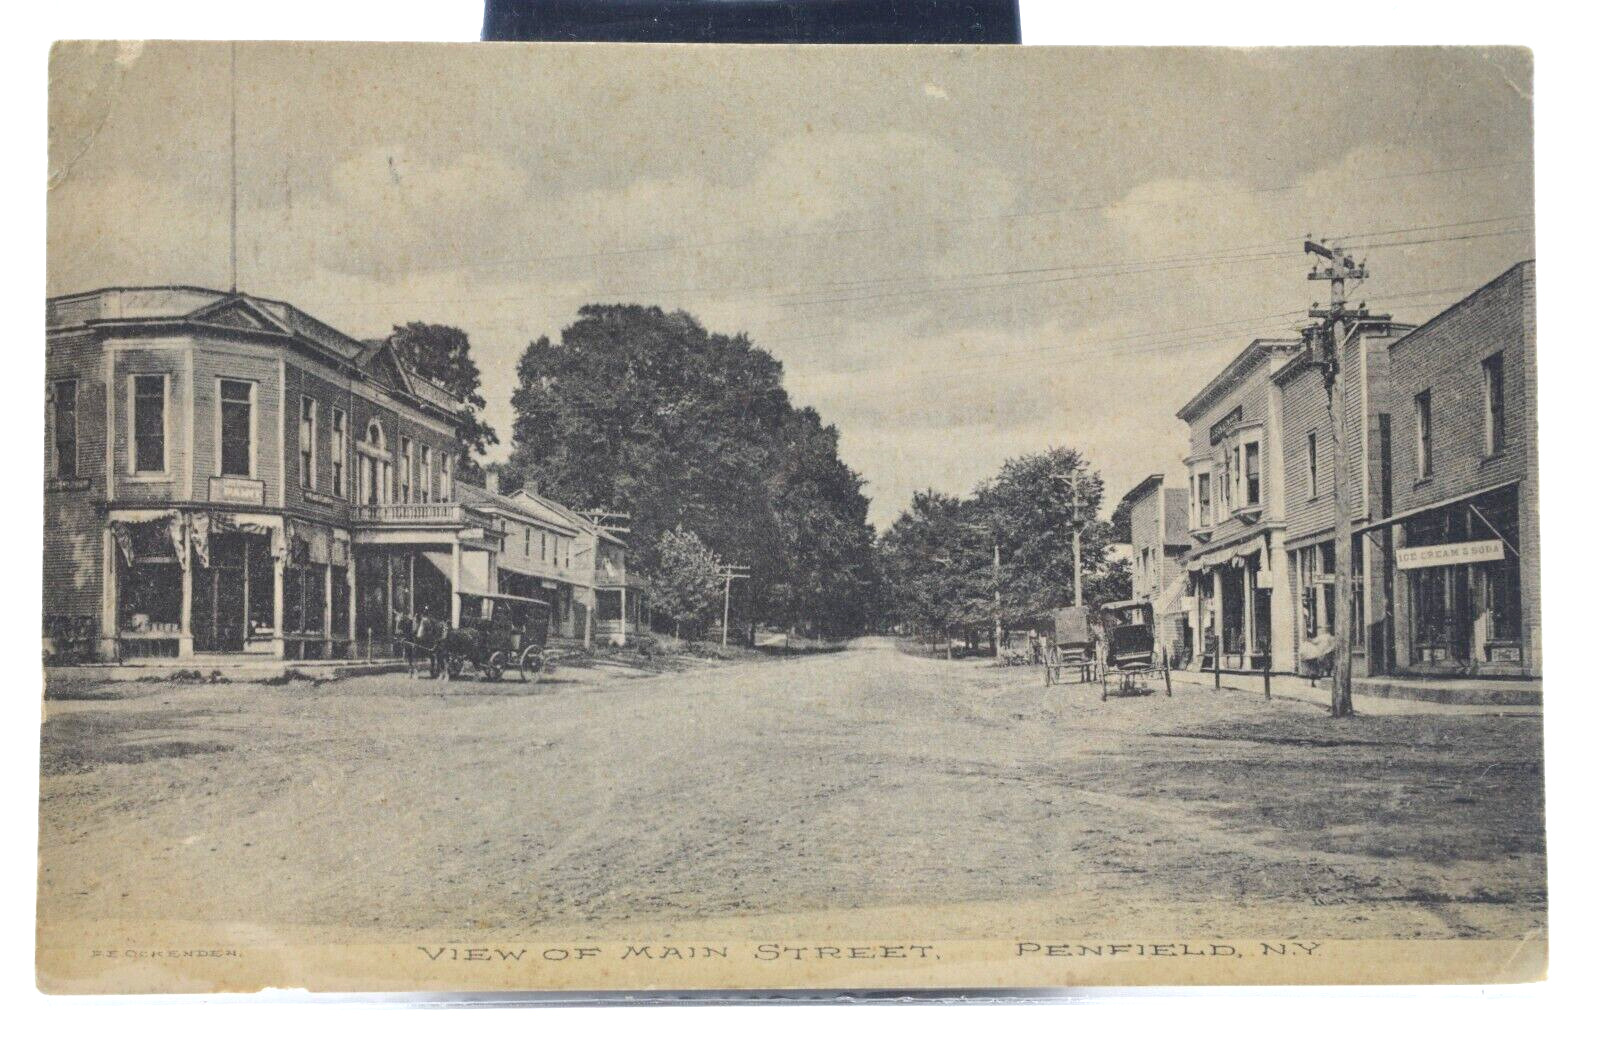 Antique Postcard - View of Main Street, Penfield, NY - c1909 -Dirt Roads/Buggies